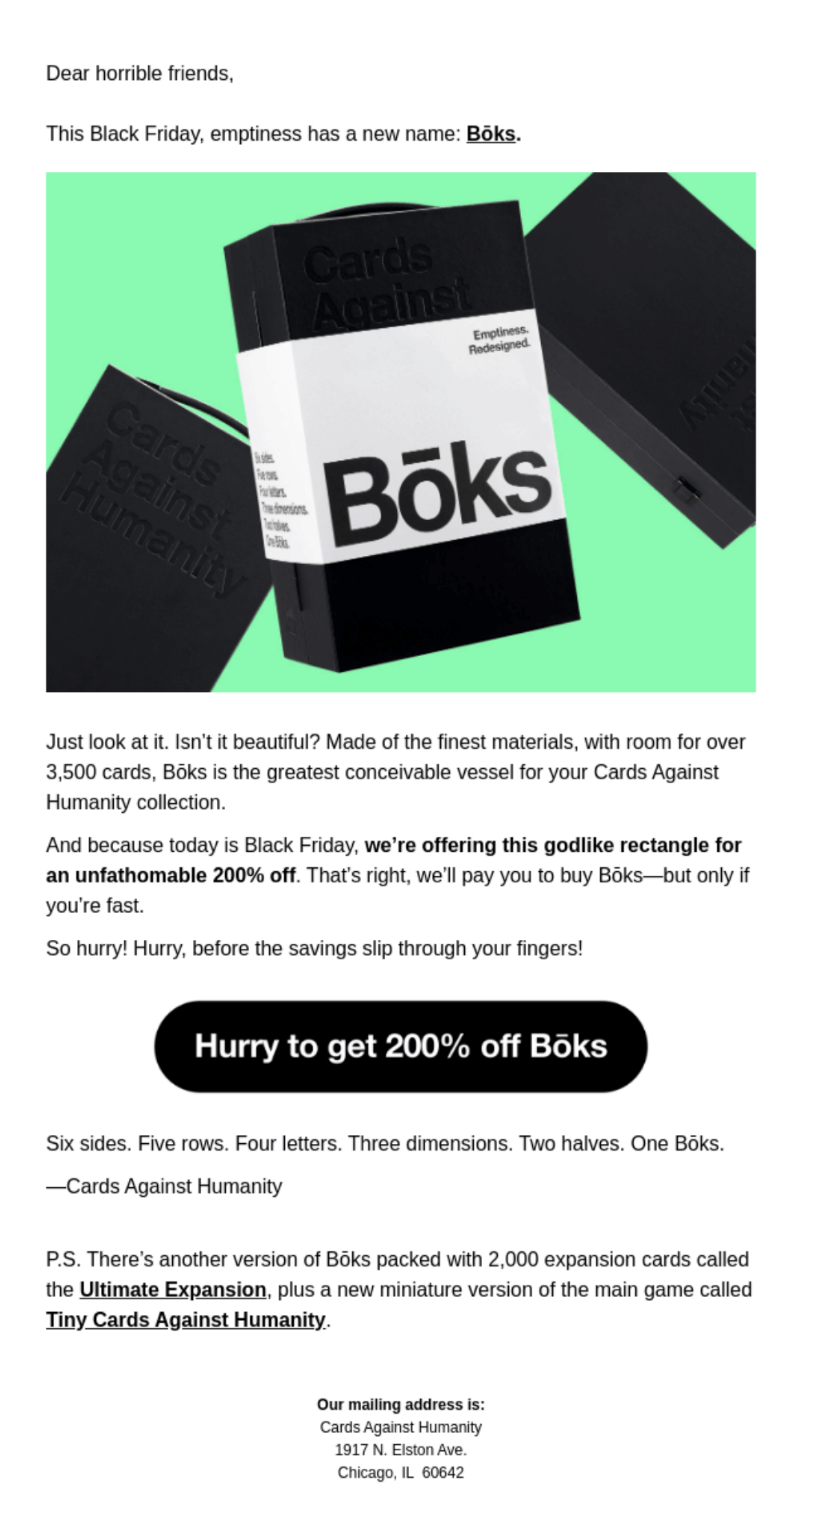 Email from Cards Against Humanity